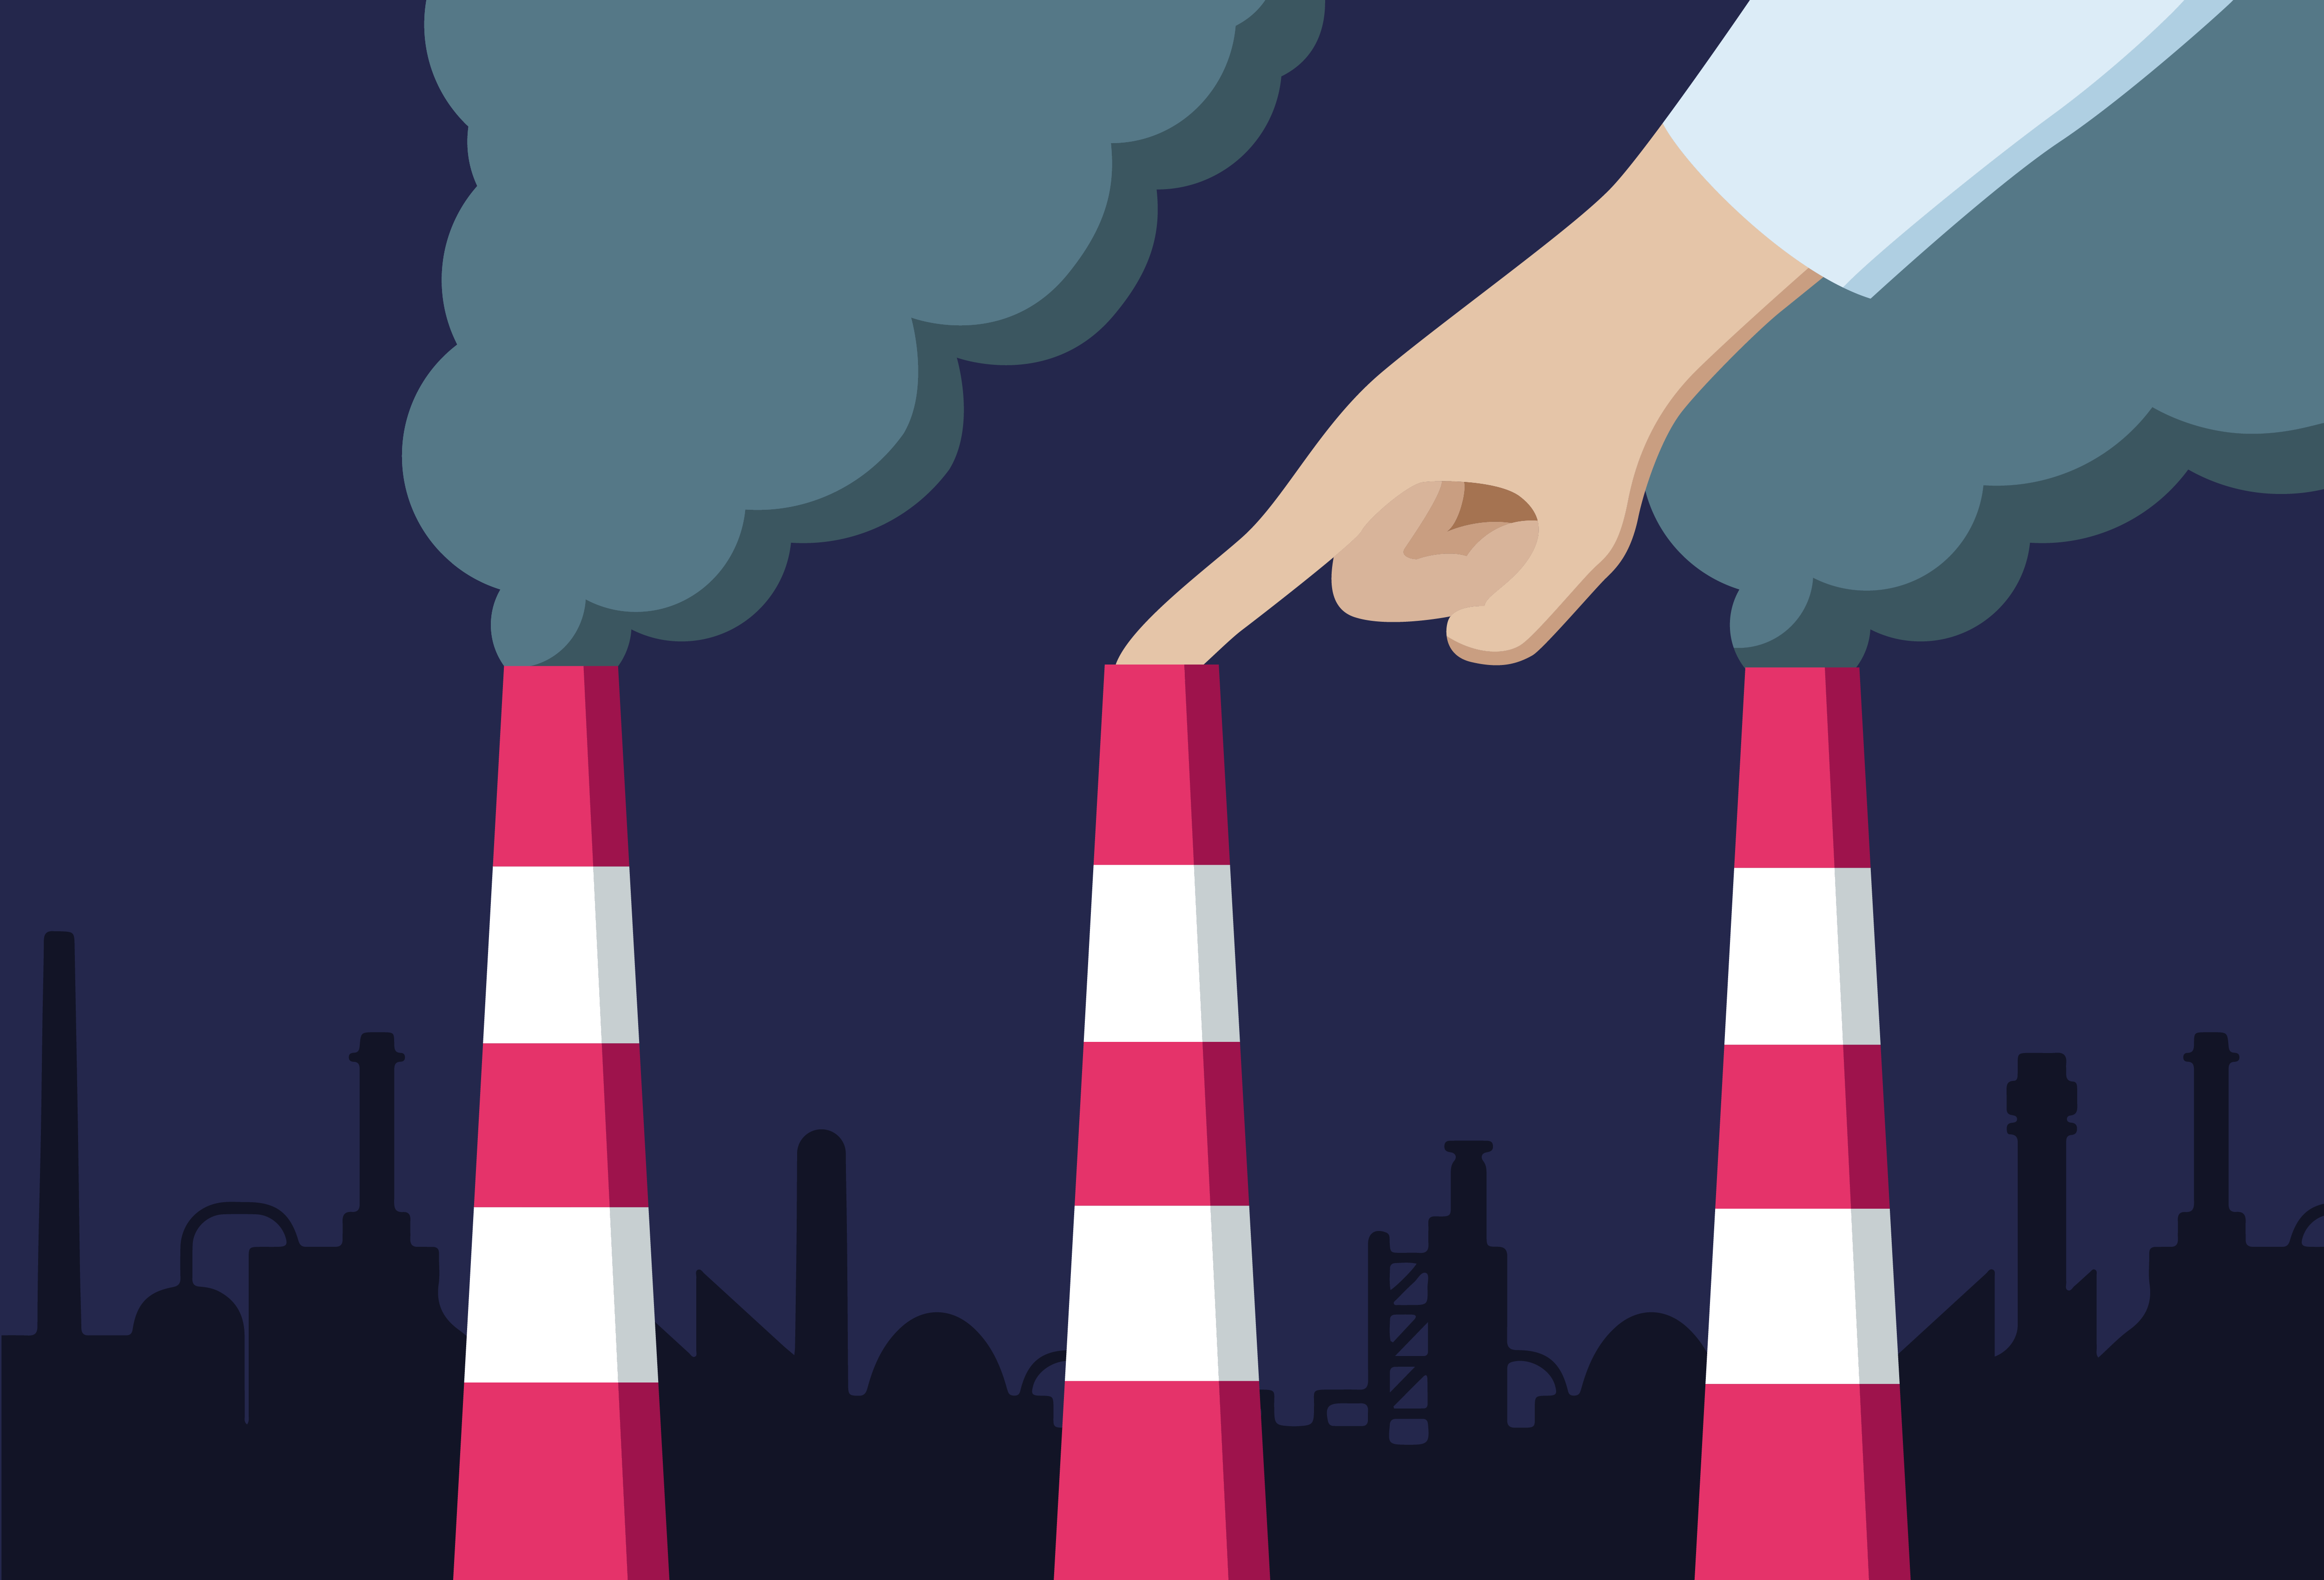 Minimalist vector art illustration of a hand reaching down to plug an industrial chimney with a finger to stop the fumes by digital artist Baz Grafton.